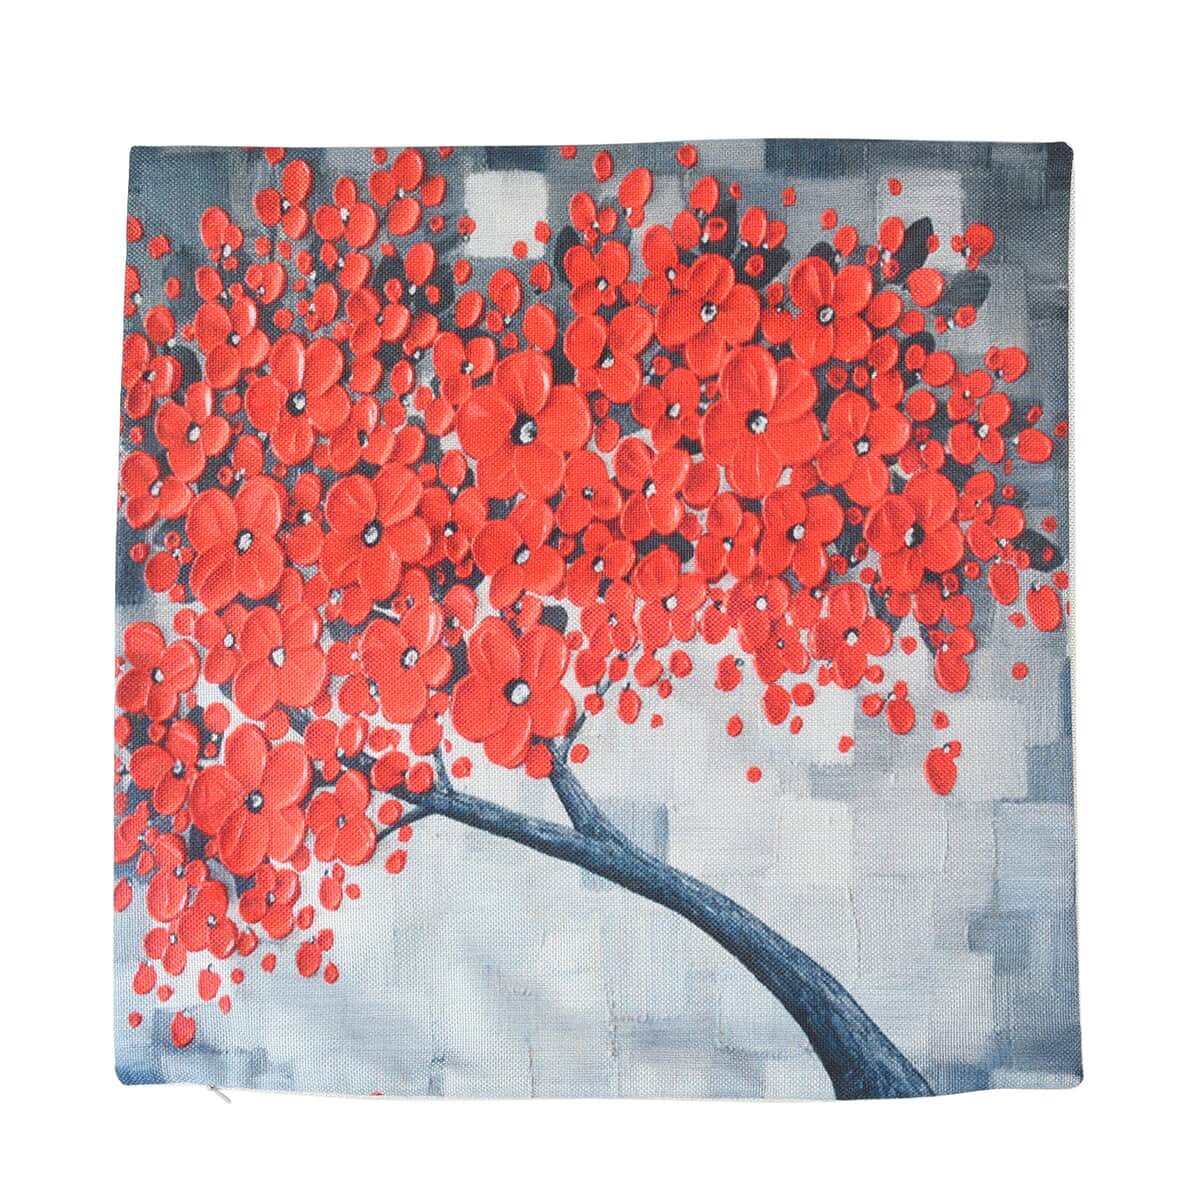 Homesmart Gray & Orange Floral Tree Pattern 100% Polyester Cushion Cover Set of 2, Wrinkle Resistant Ultra Soft Cushion Cover Set with Zipper Closure image number 3